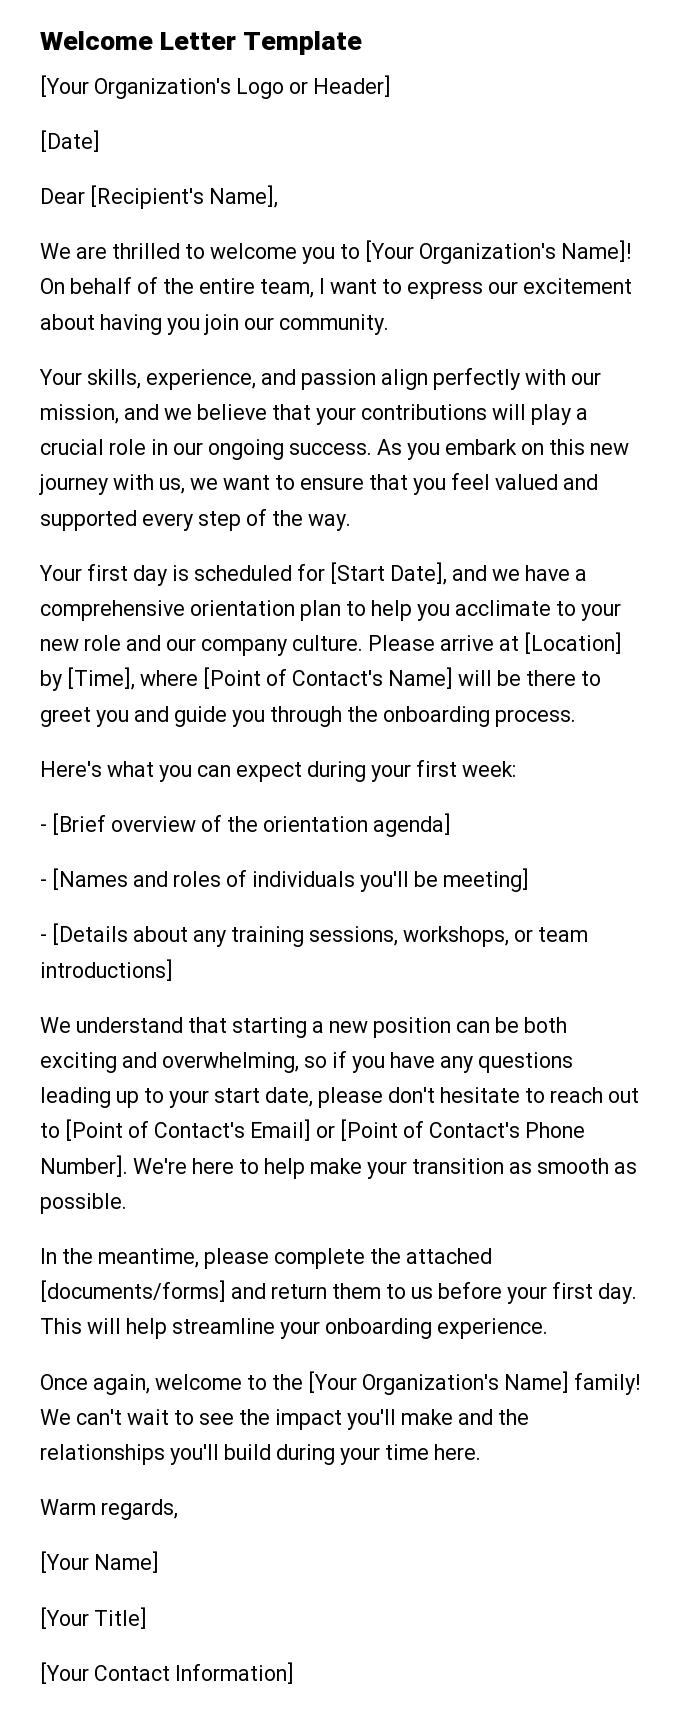 Welcome Letter Template